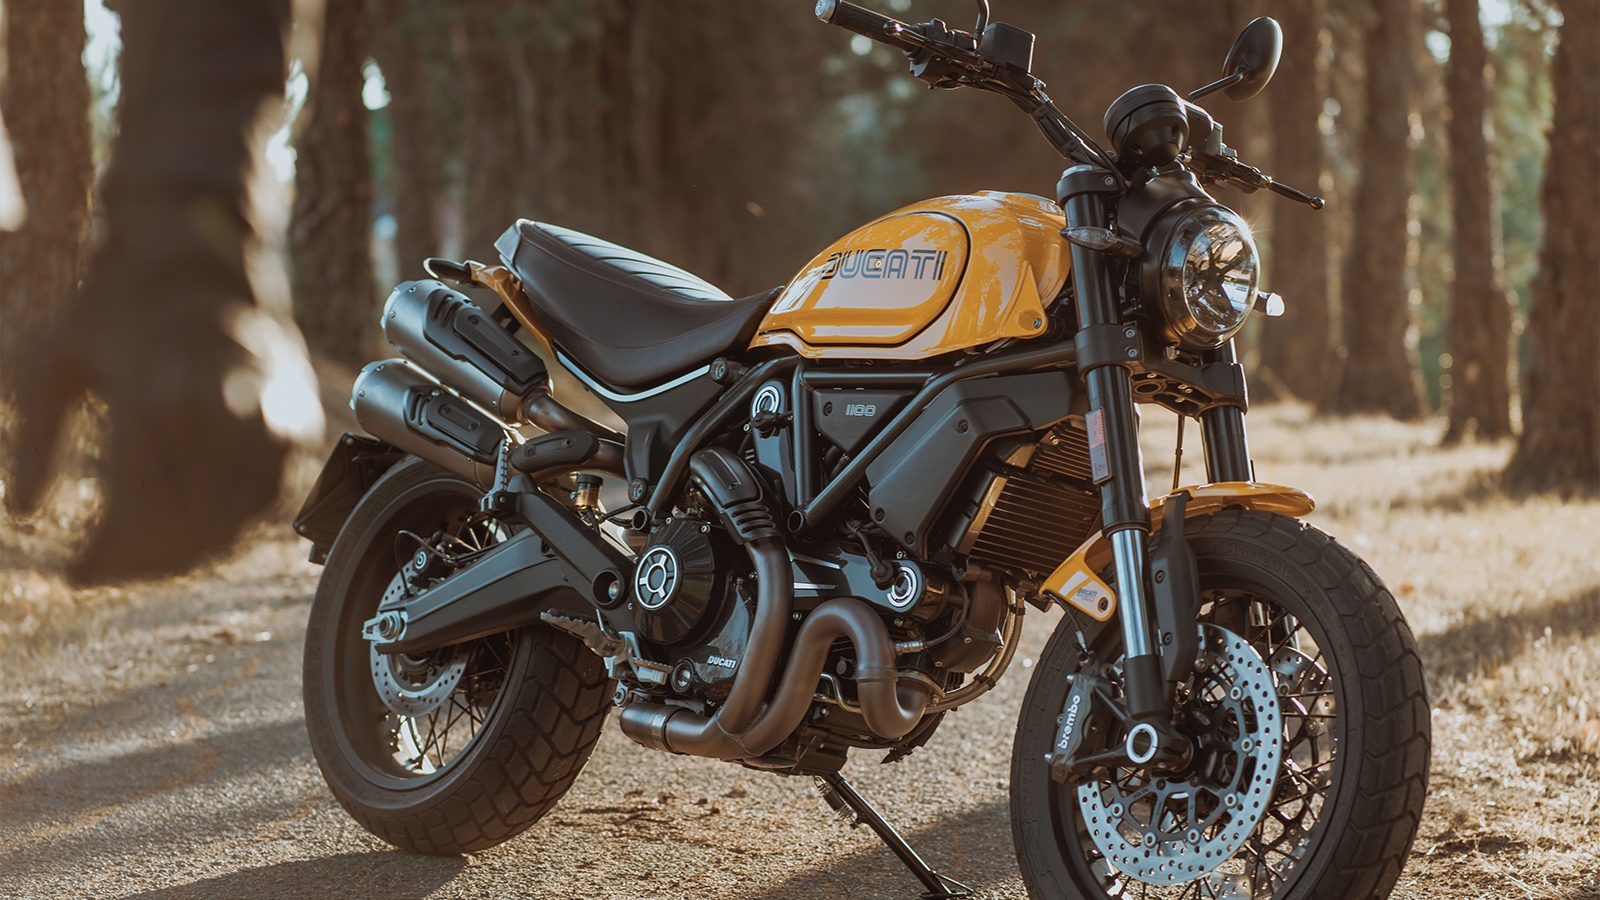 In Pics Ducati Scrambler 1100 Tribute Pro Unveiled, See Design, Features and More News18